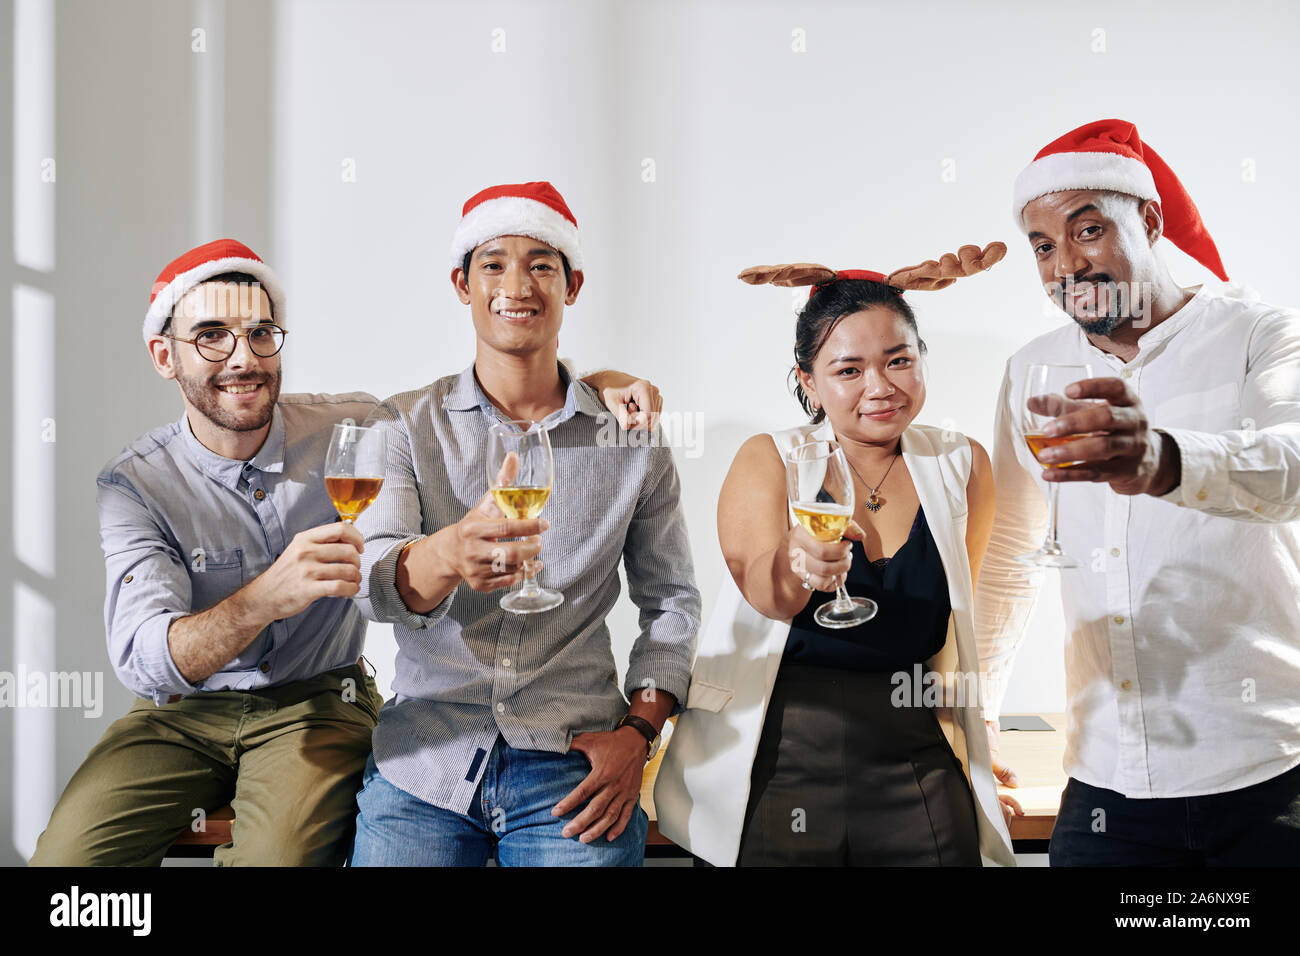 Happy young business people in Christmas hats raising hands with champagne glasses and smiling at camera Stock Photo